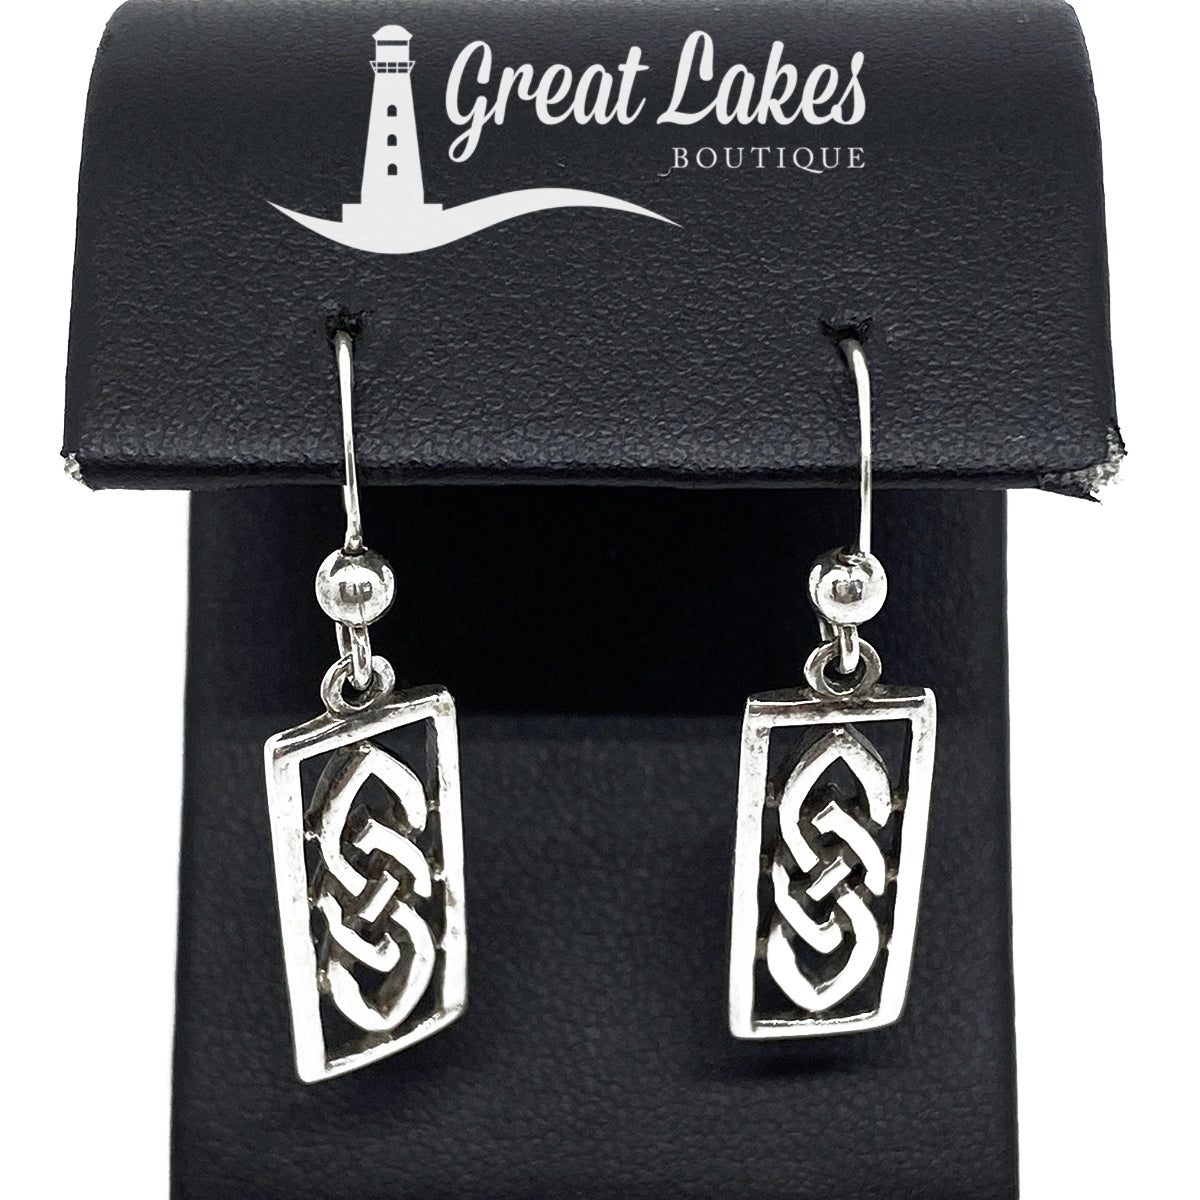 Great Lakes Boutique Silver Filigree Earrings